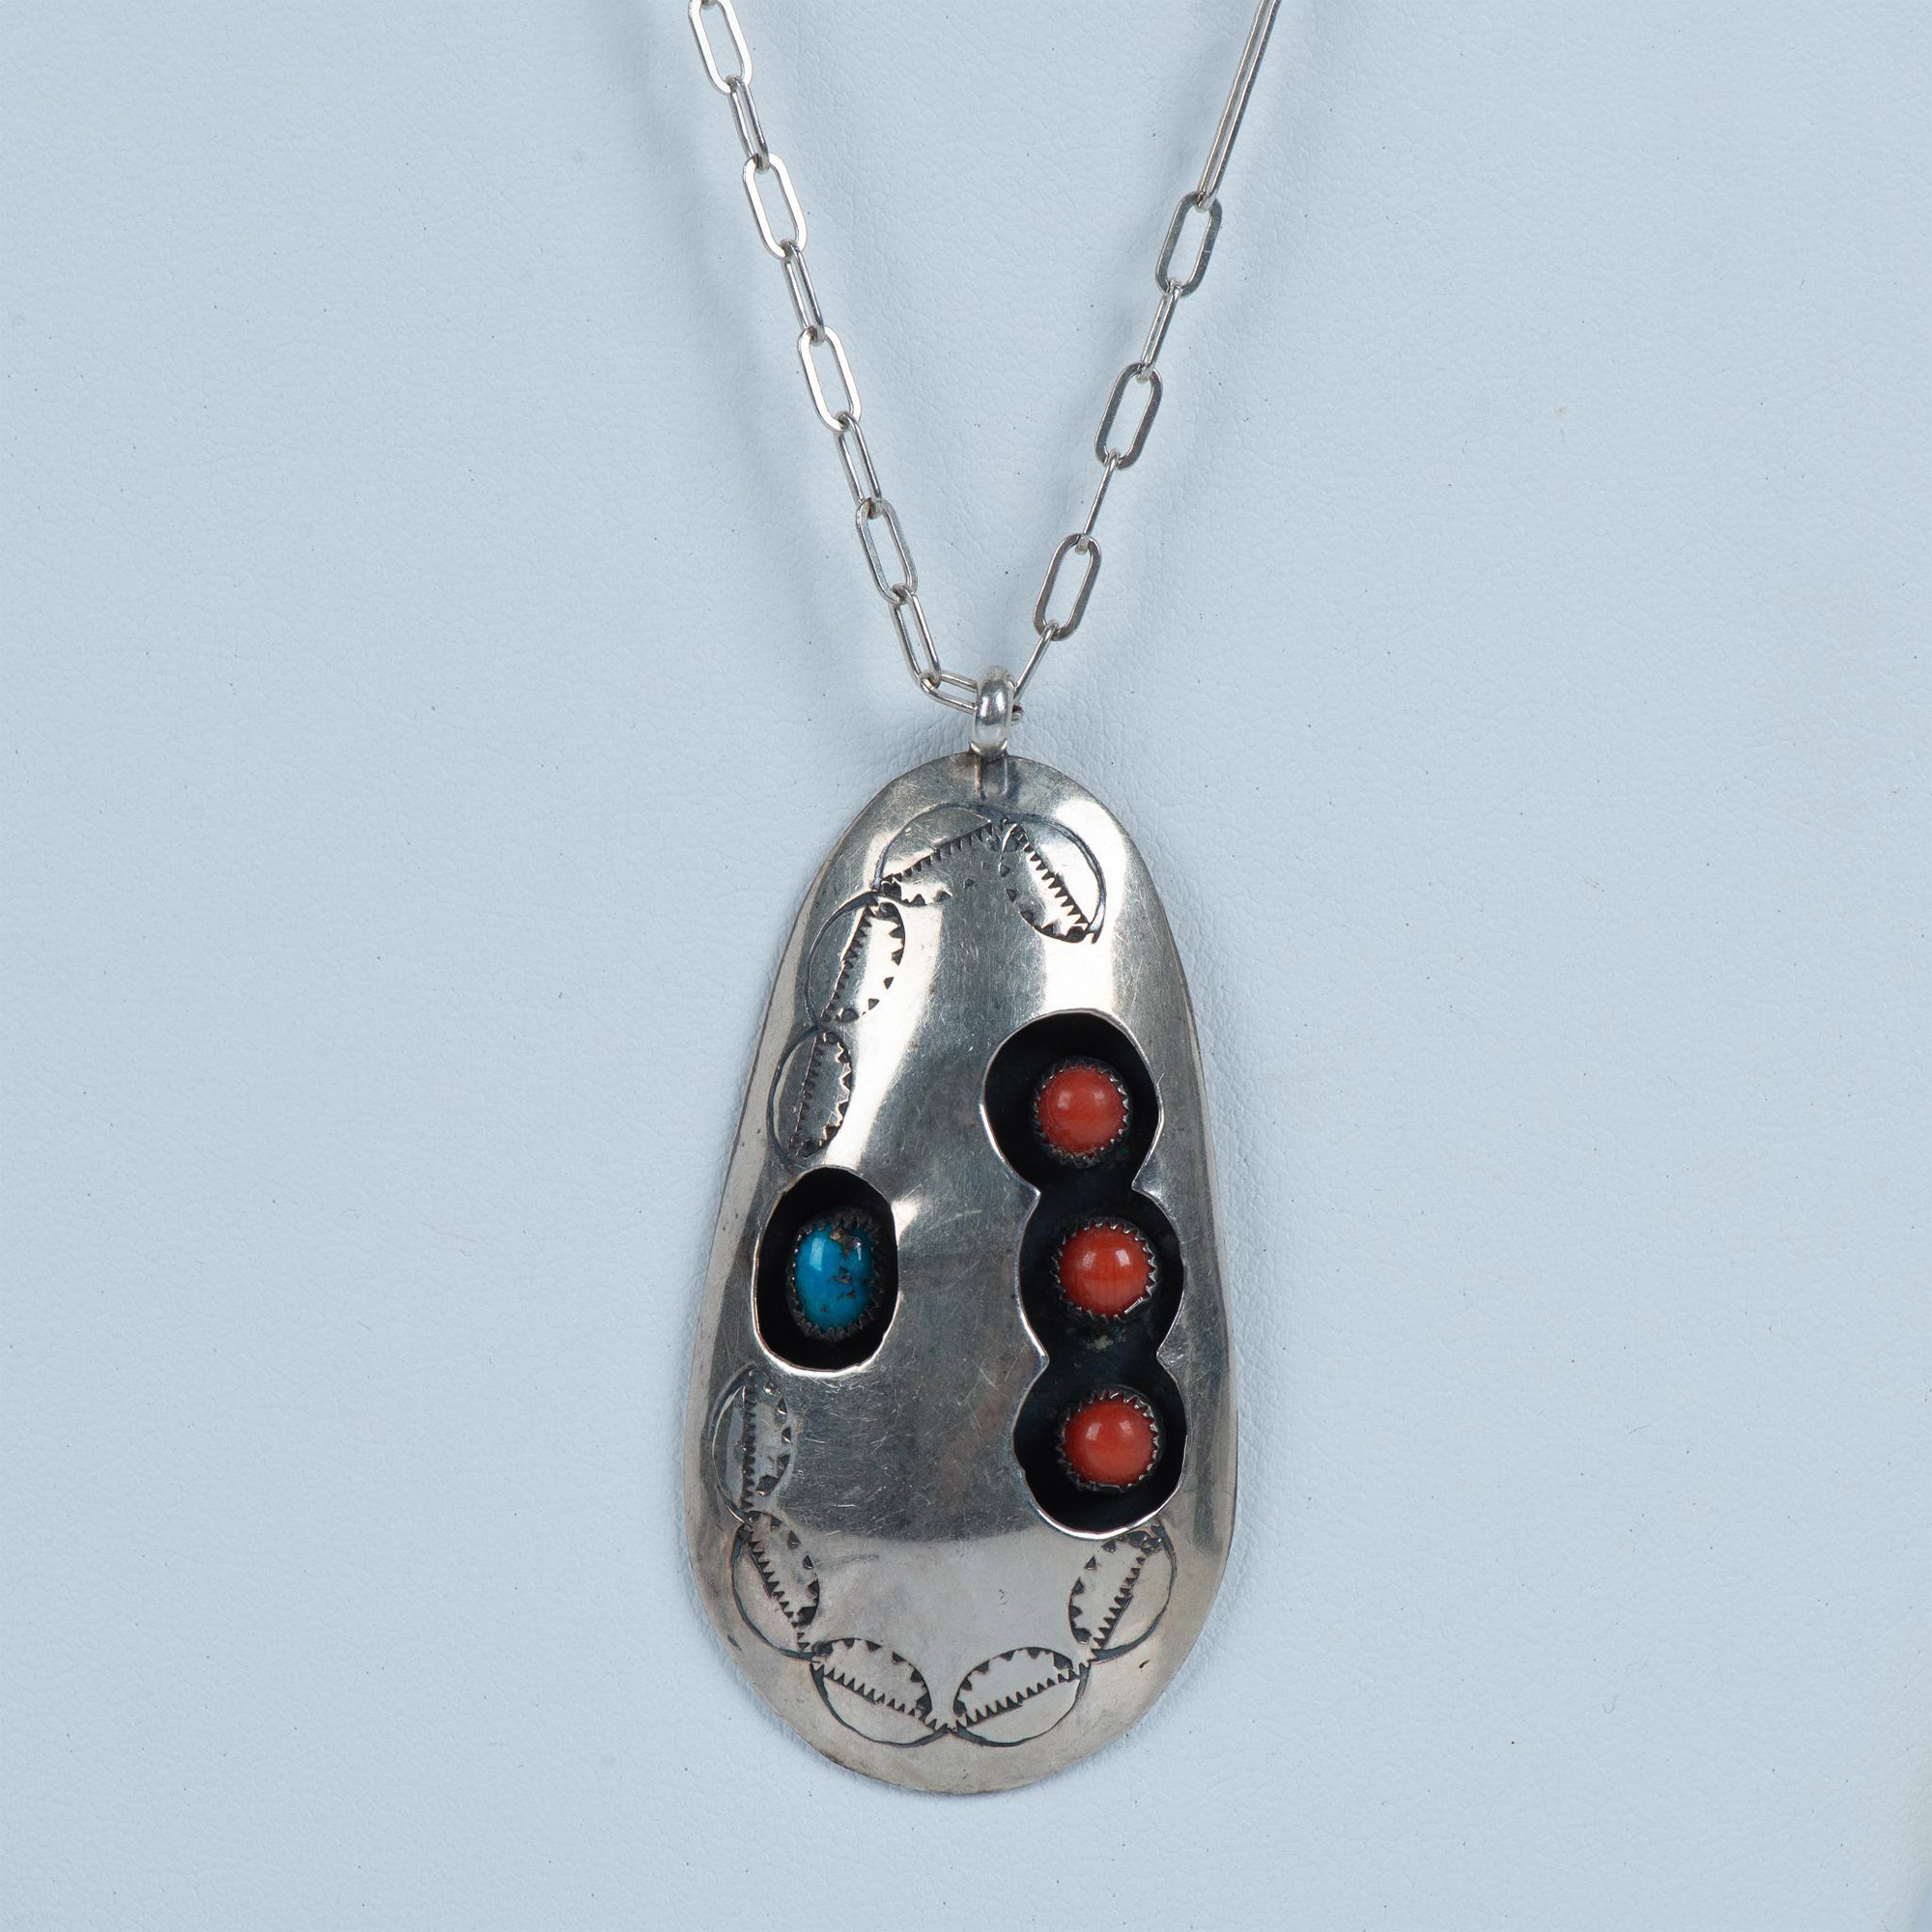 Handmade Southwestern Sterling, Coral and Turquoise Necklace - Image 2 of 4